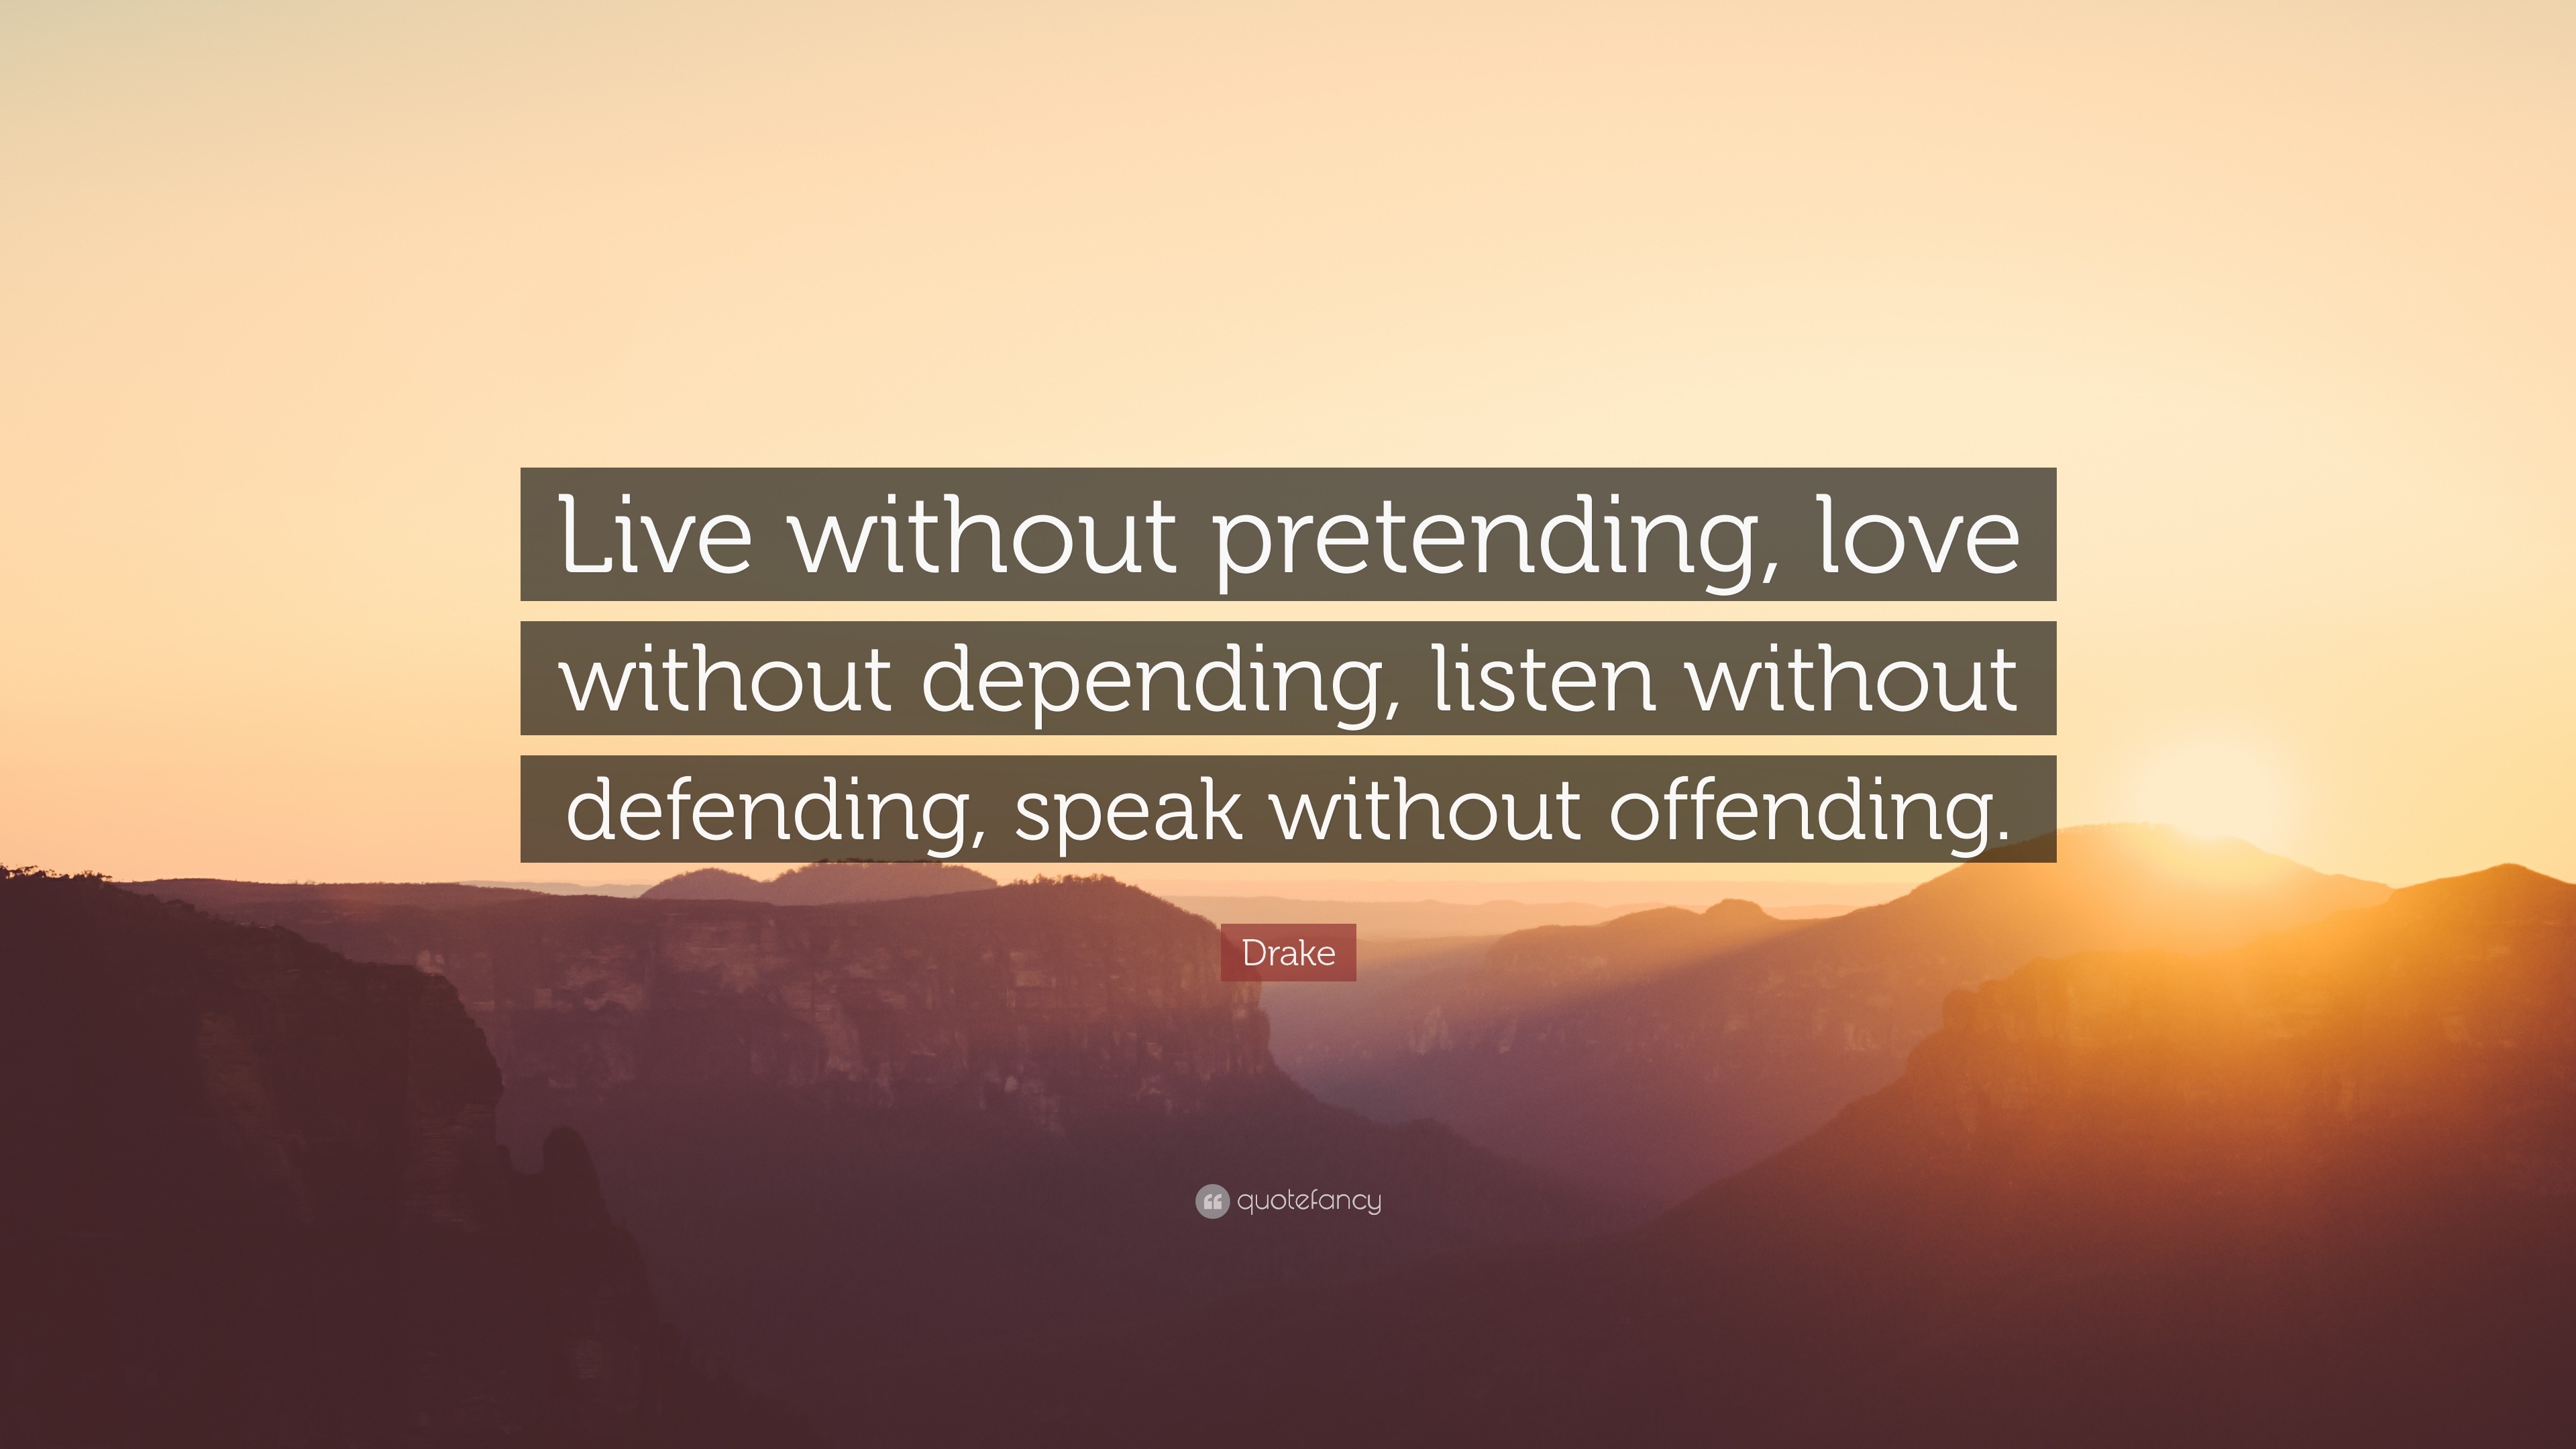 Drake Quote “Live without pretending love without depending listen without defending